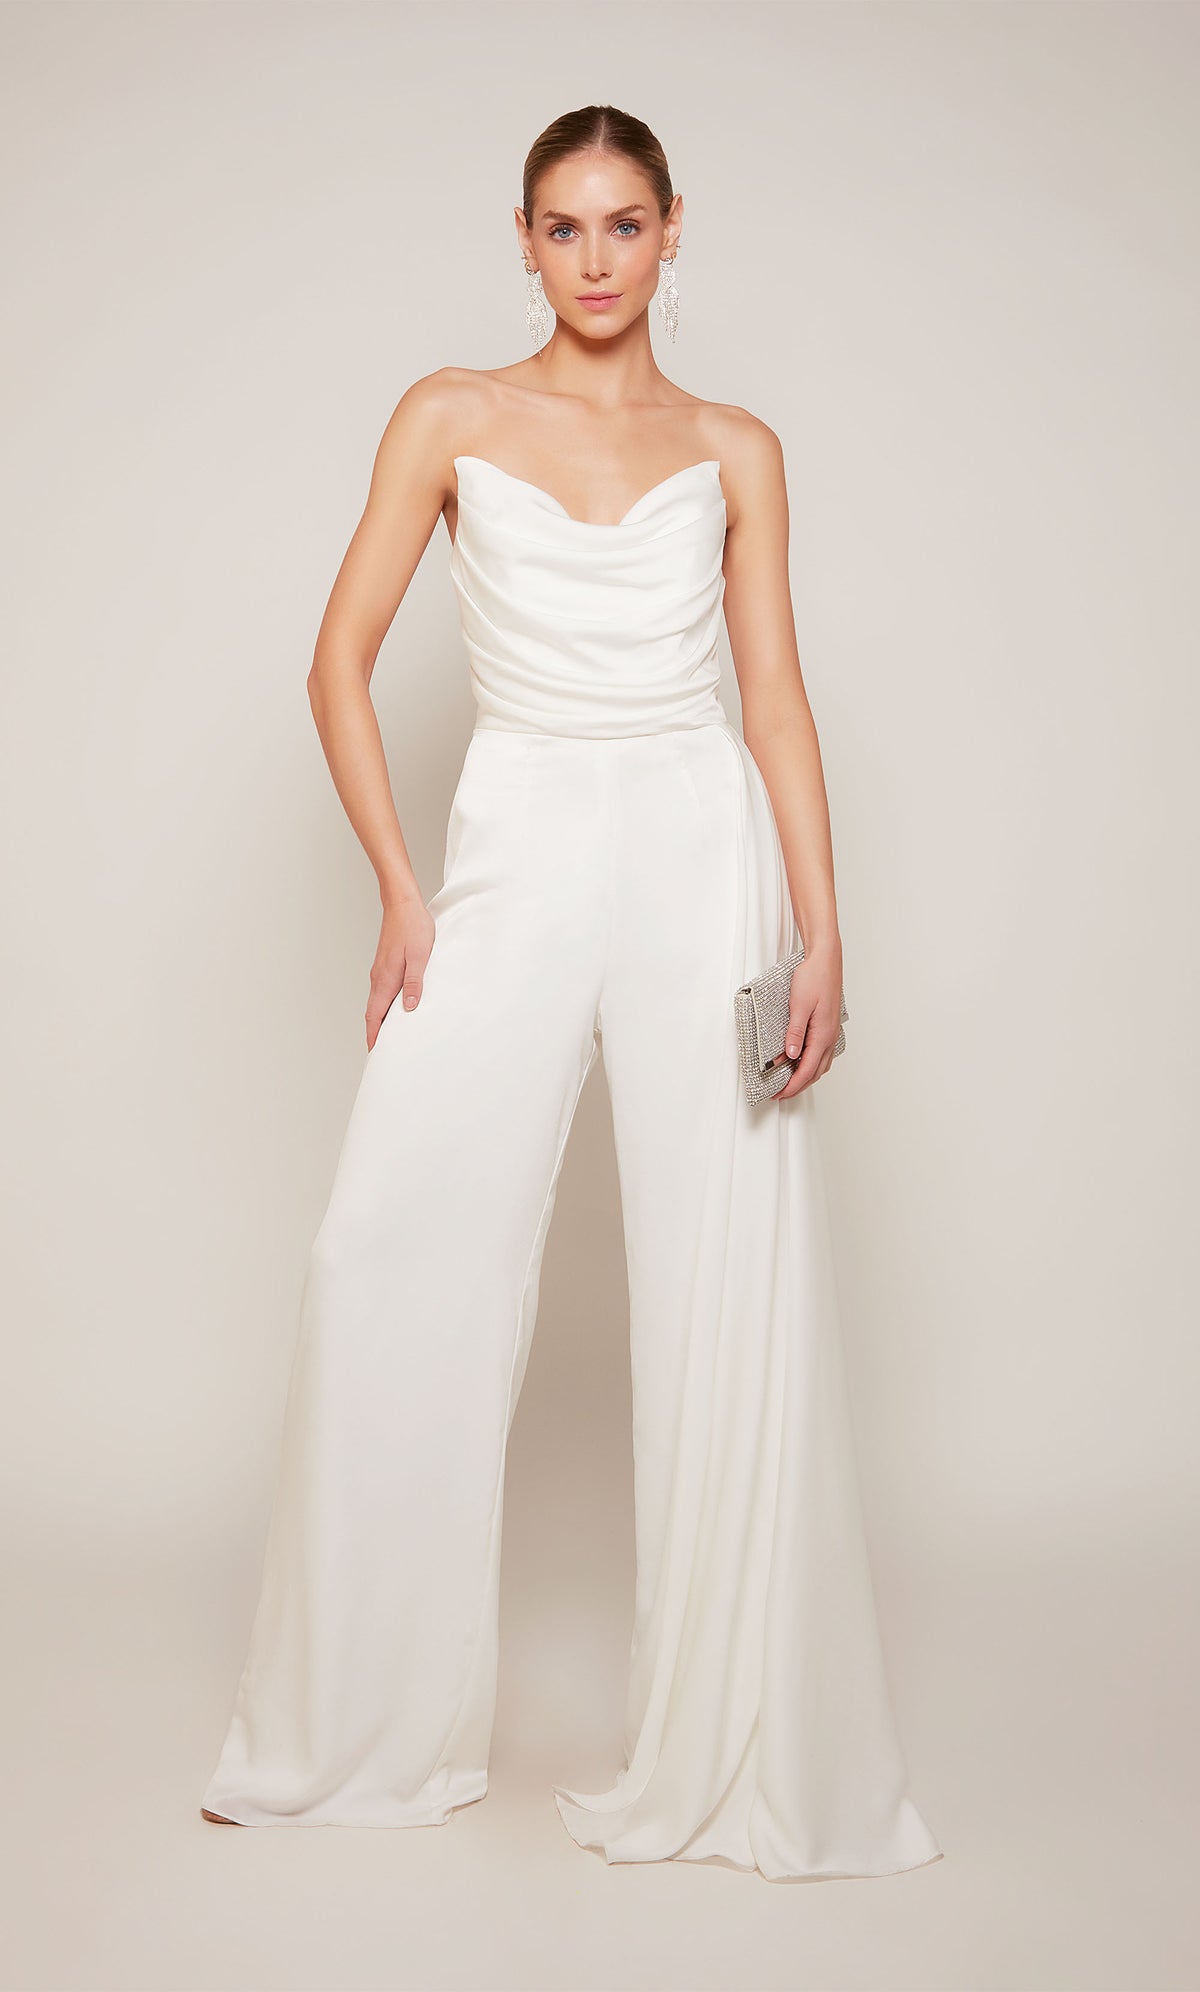 A chic white wedding jumpsuit with a ruched top and cascading drape, and wide leg pant.